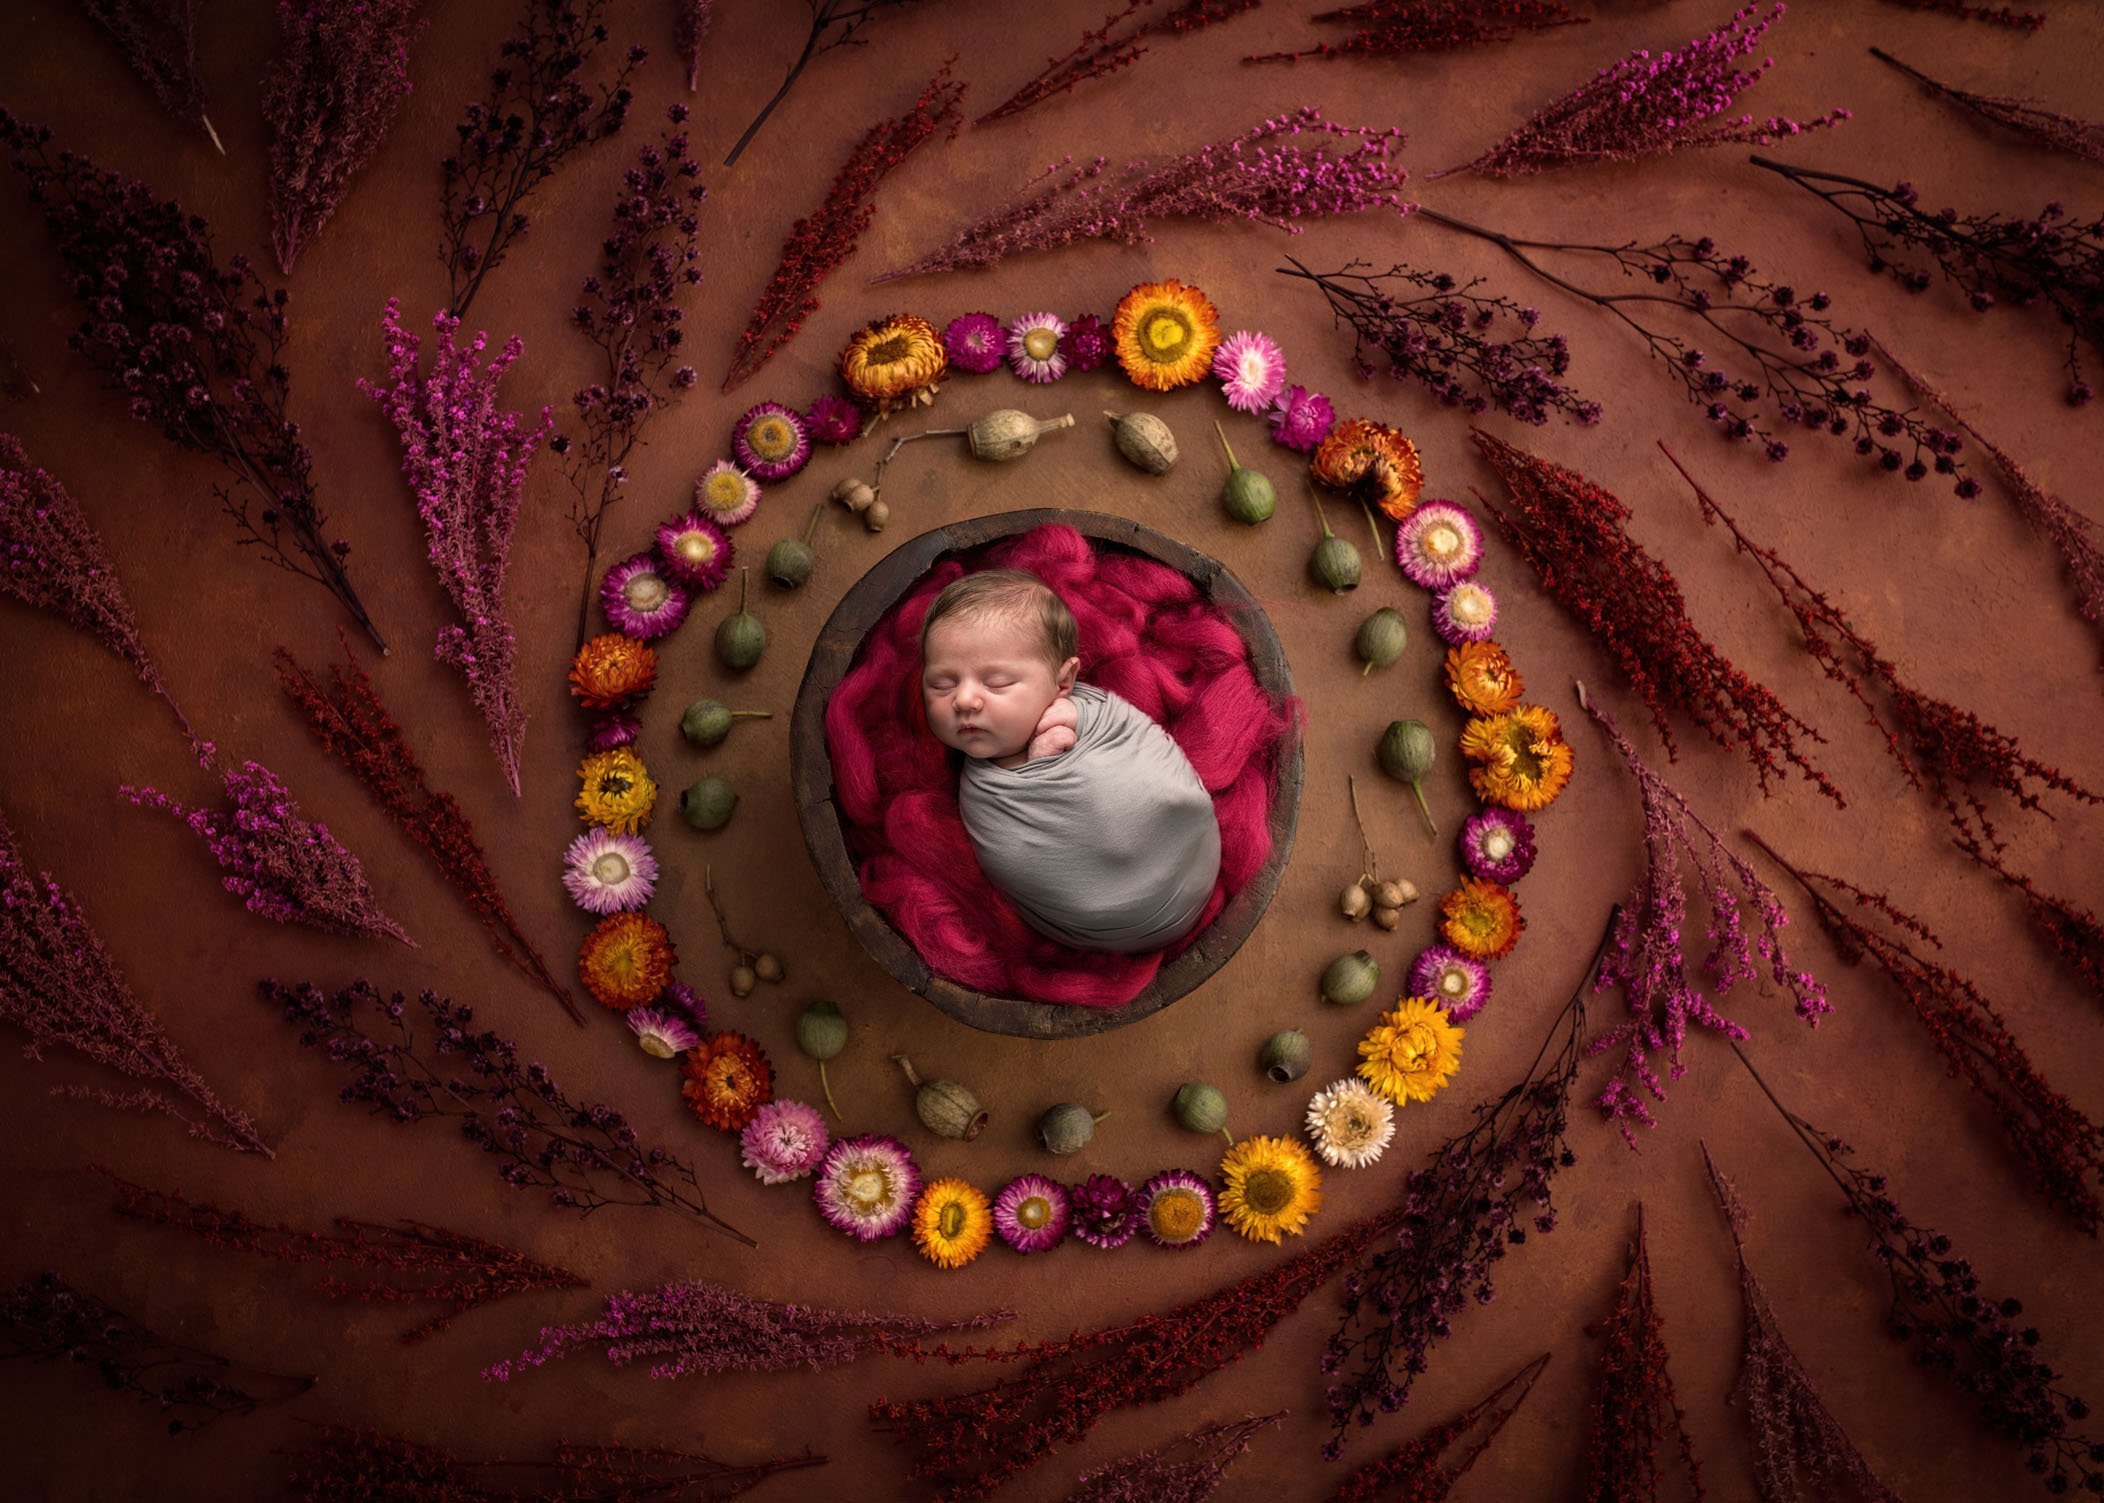 newborn baby sleeping in red bowl of fluff surrounded by swirl of flowers